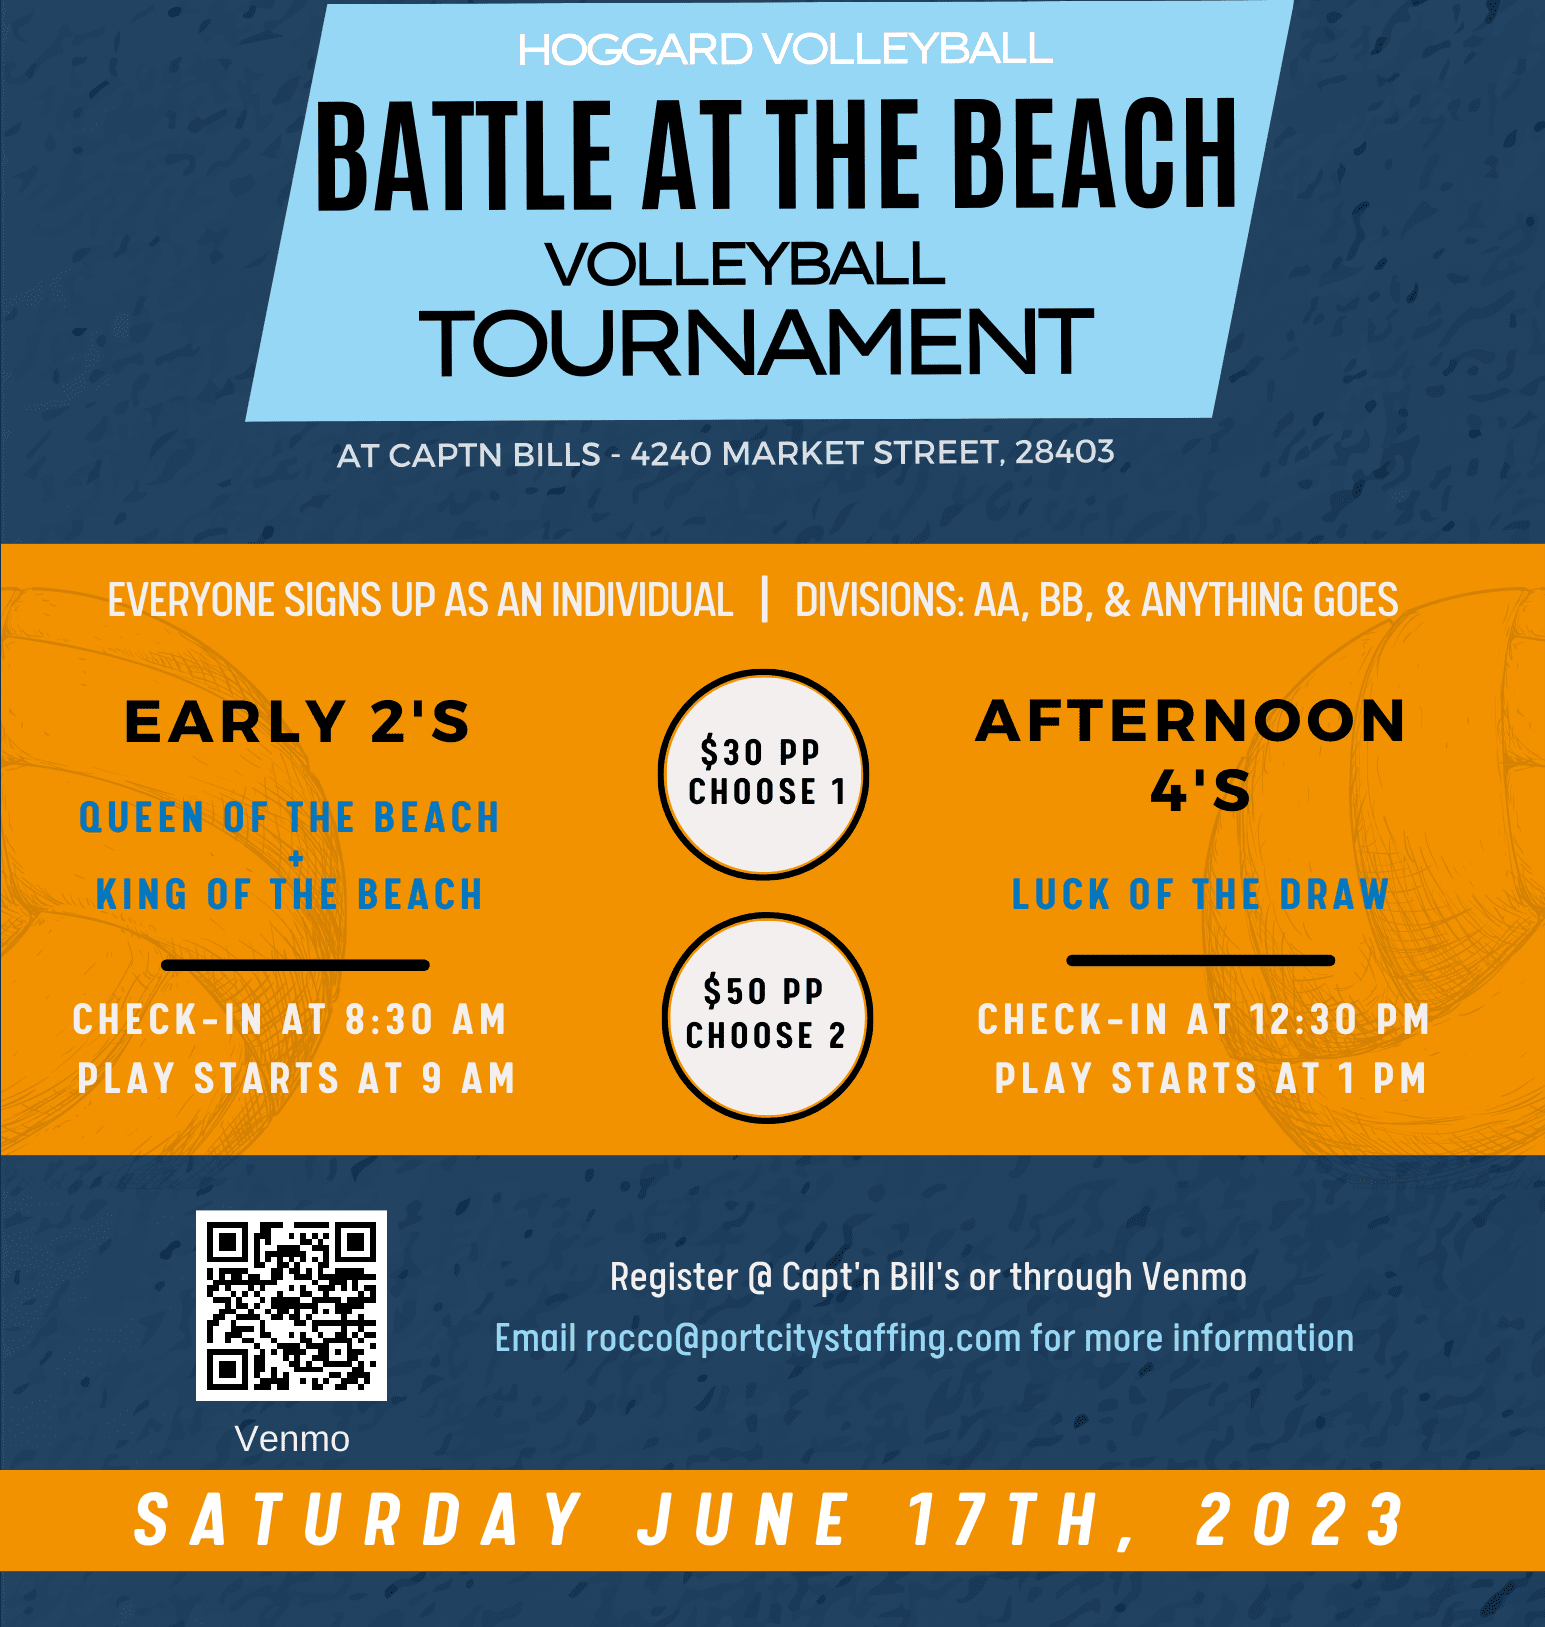 Battle at the Beach See You at Bill's